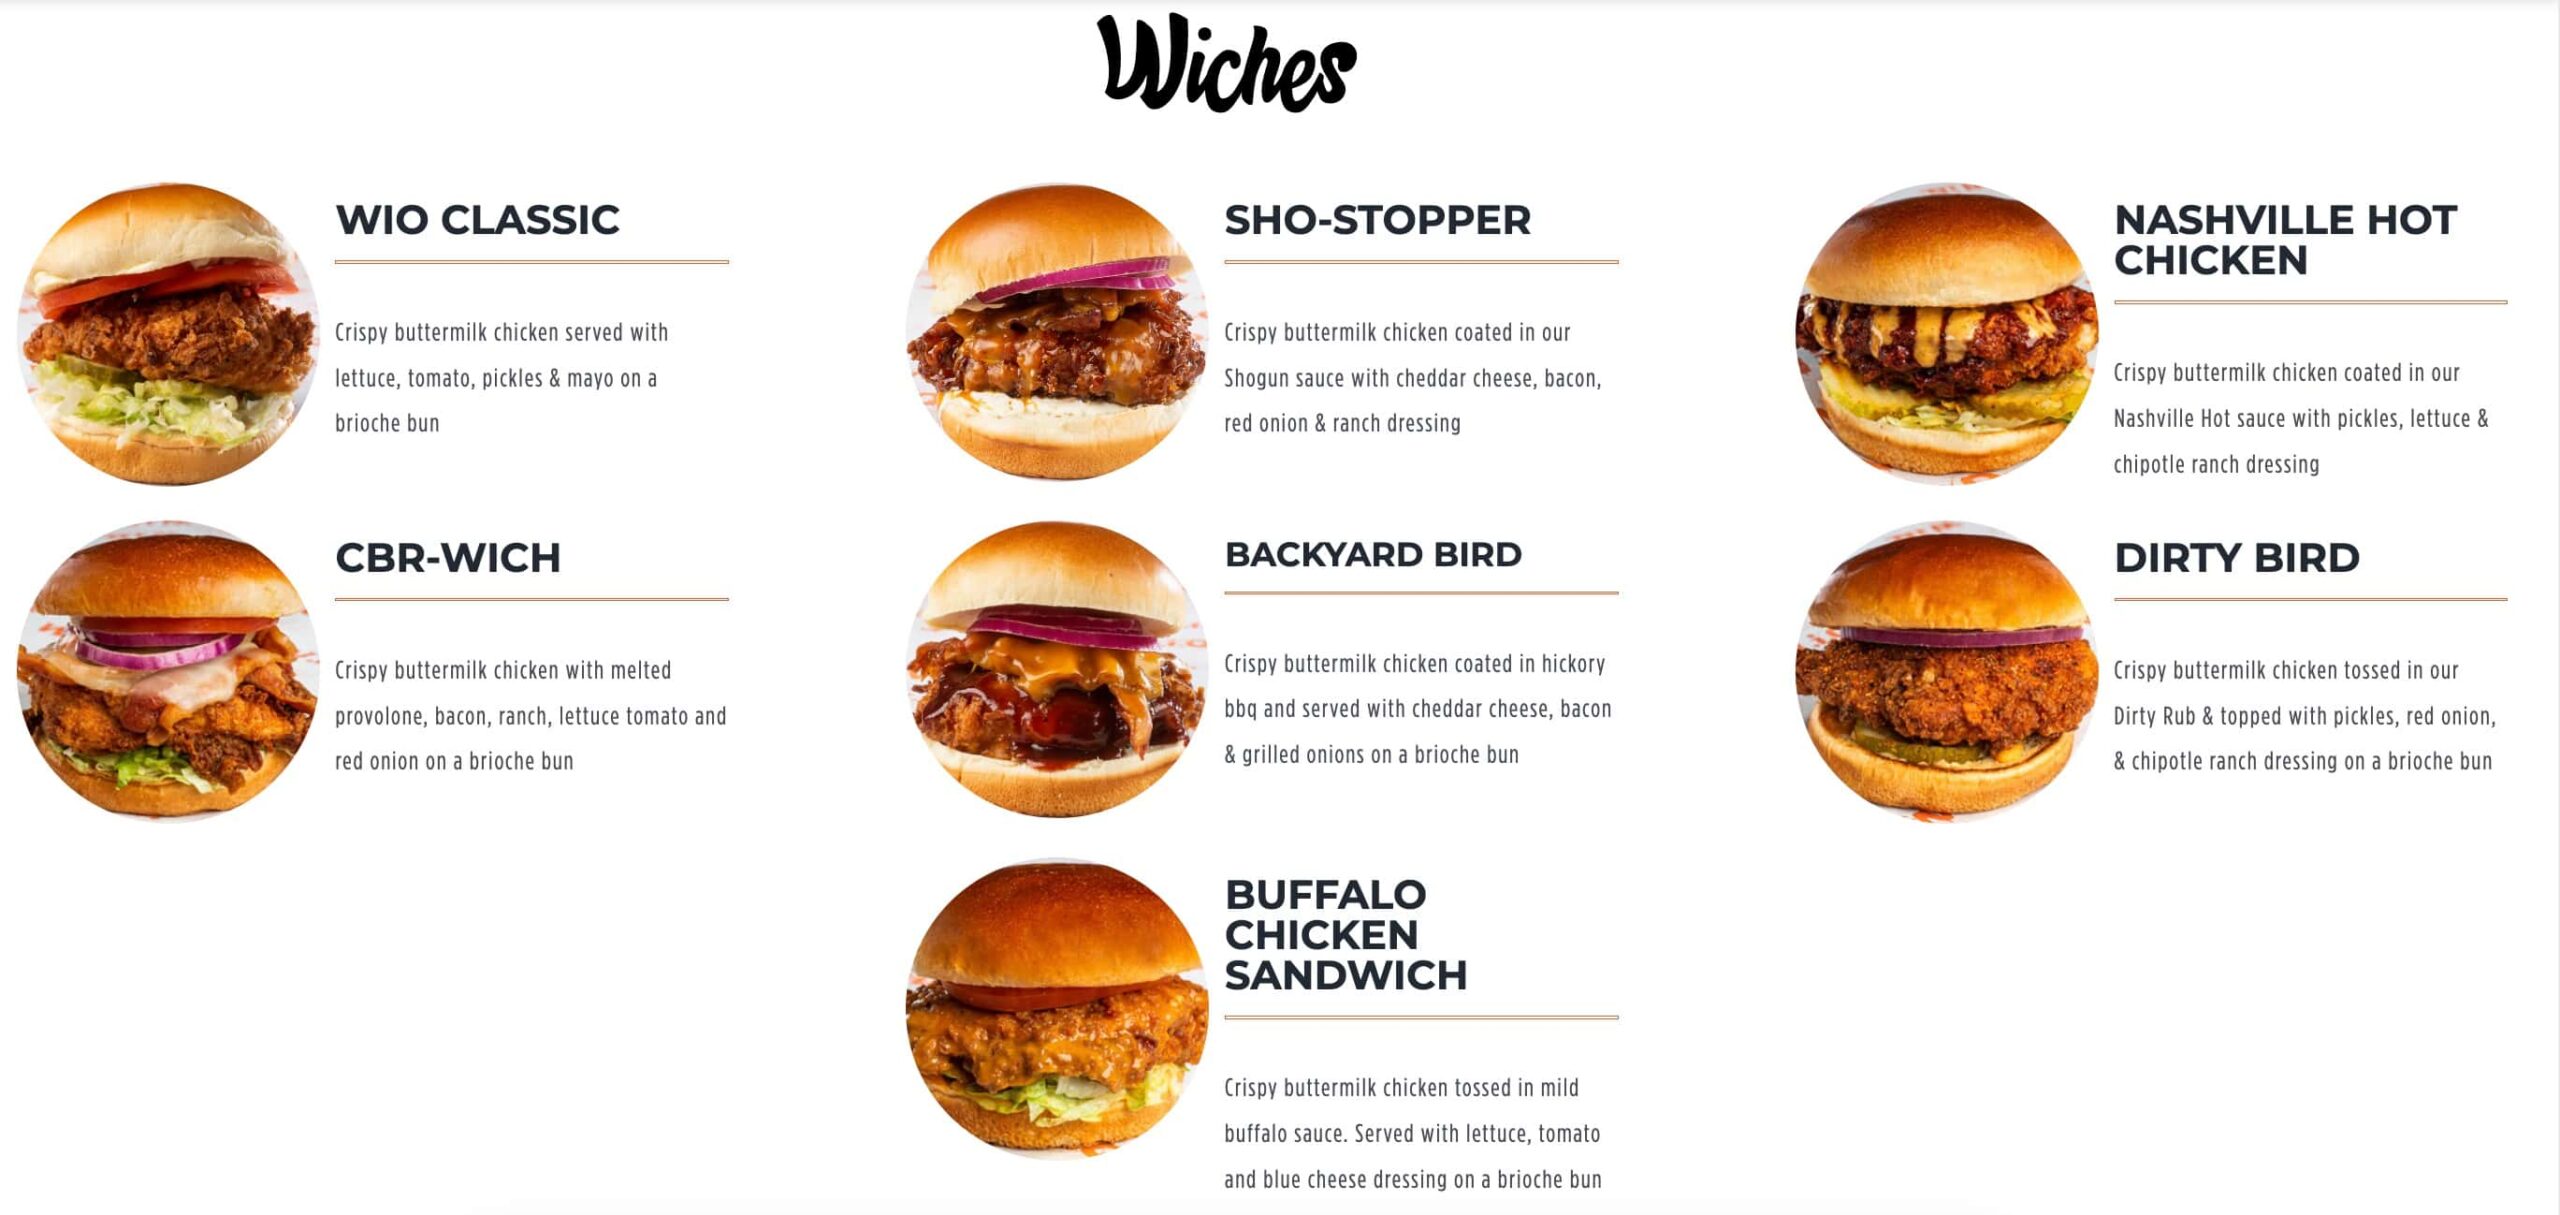 Wing It On! Wiches Menu